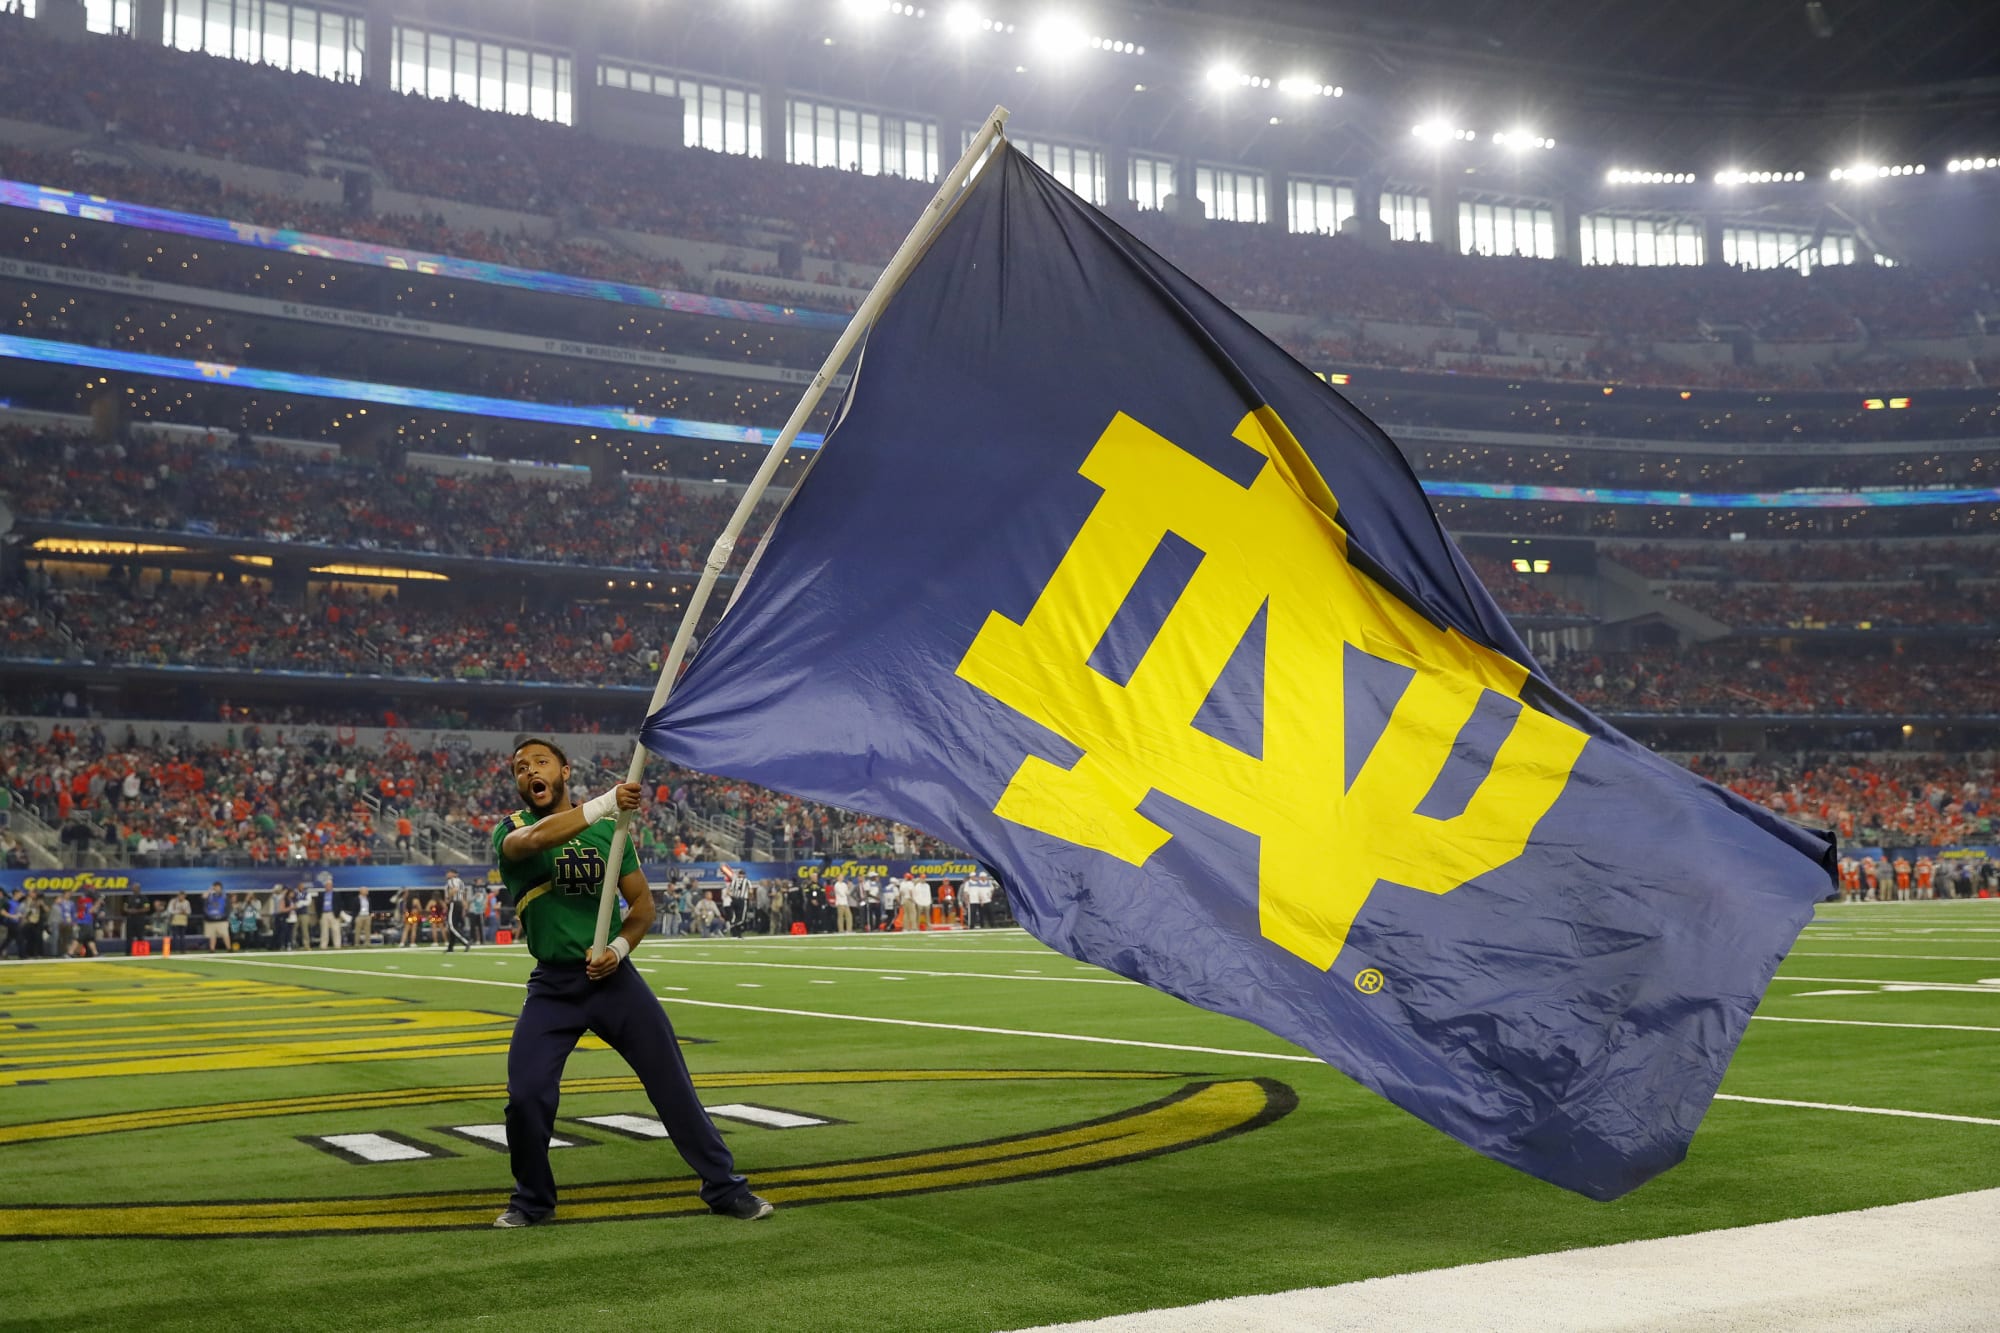 Notre Dame Football: 2021 schedule has plenty of intriguing storylines